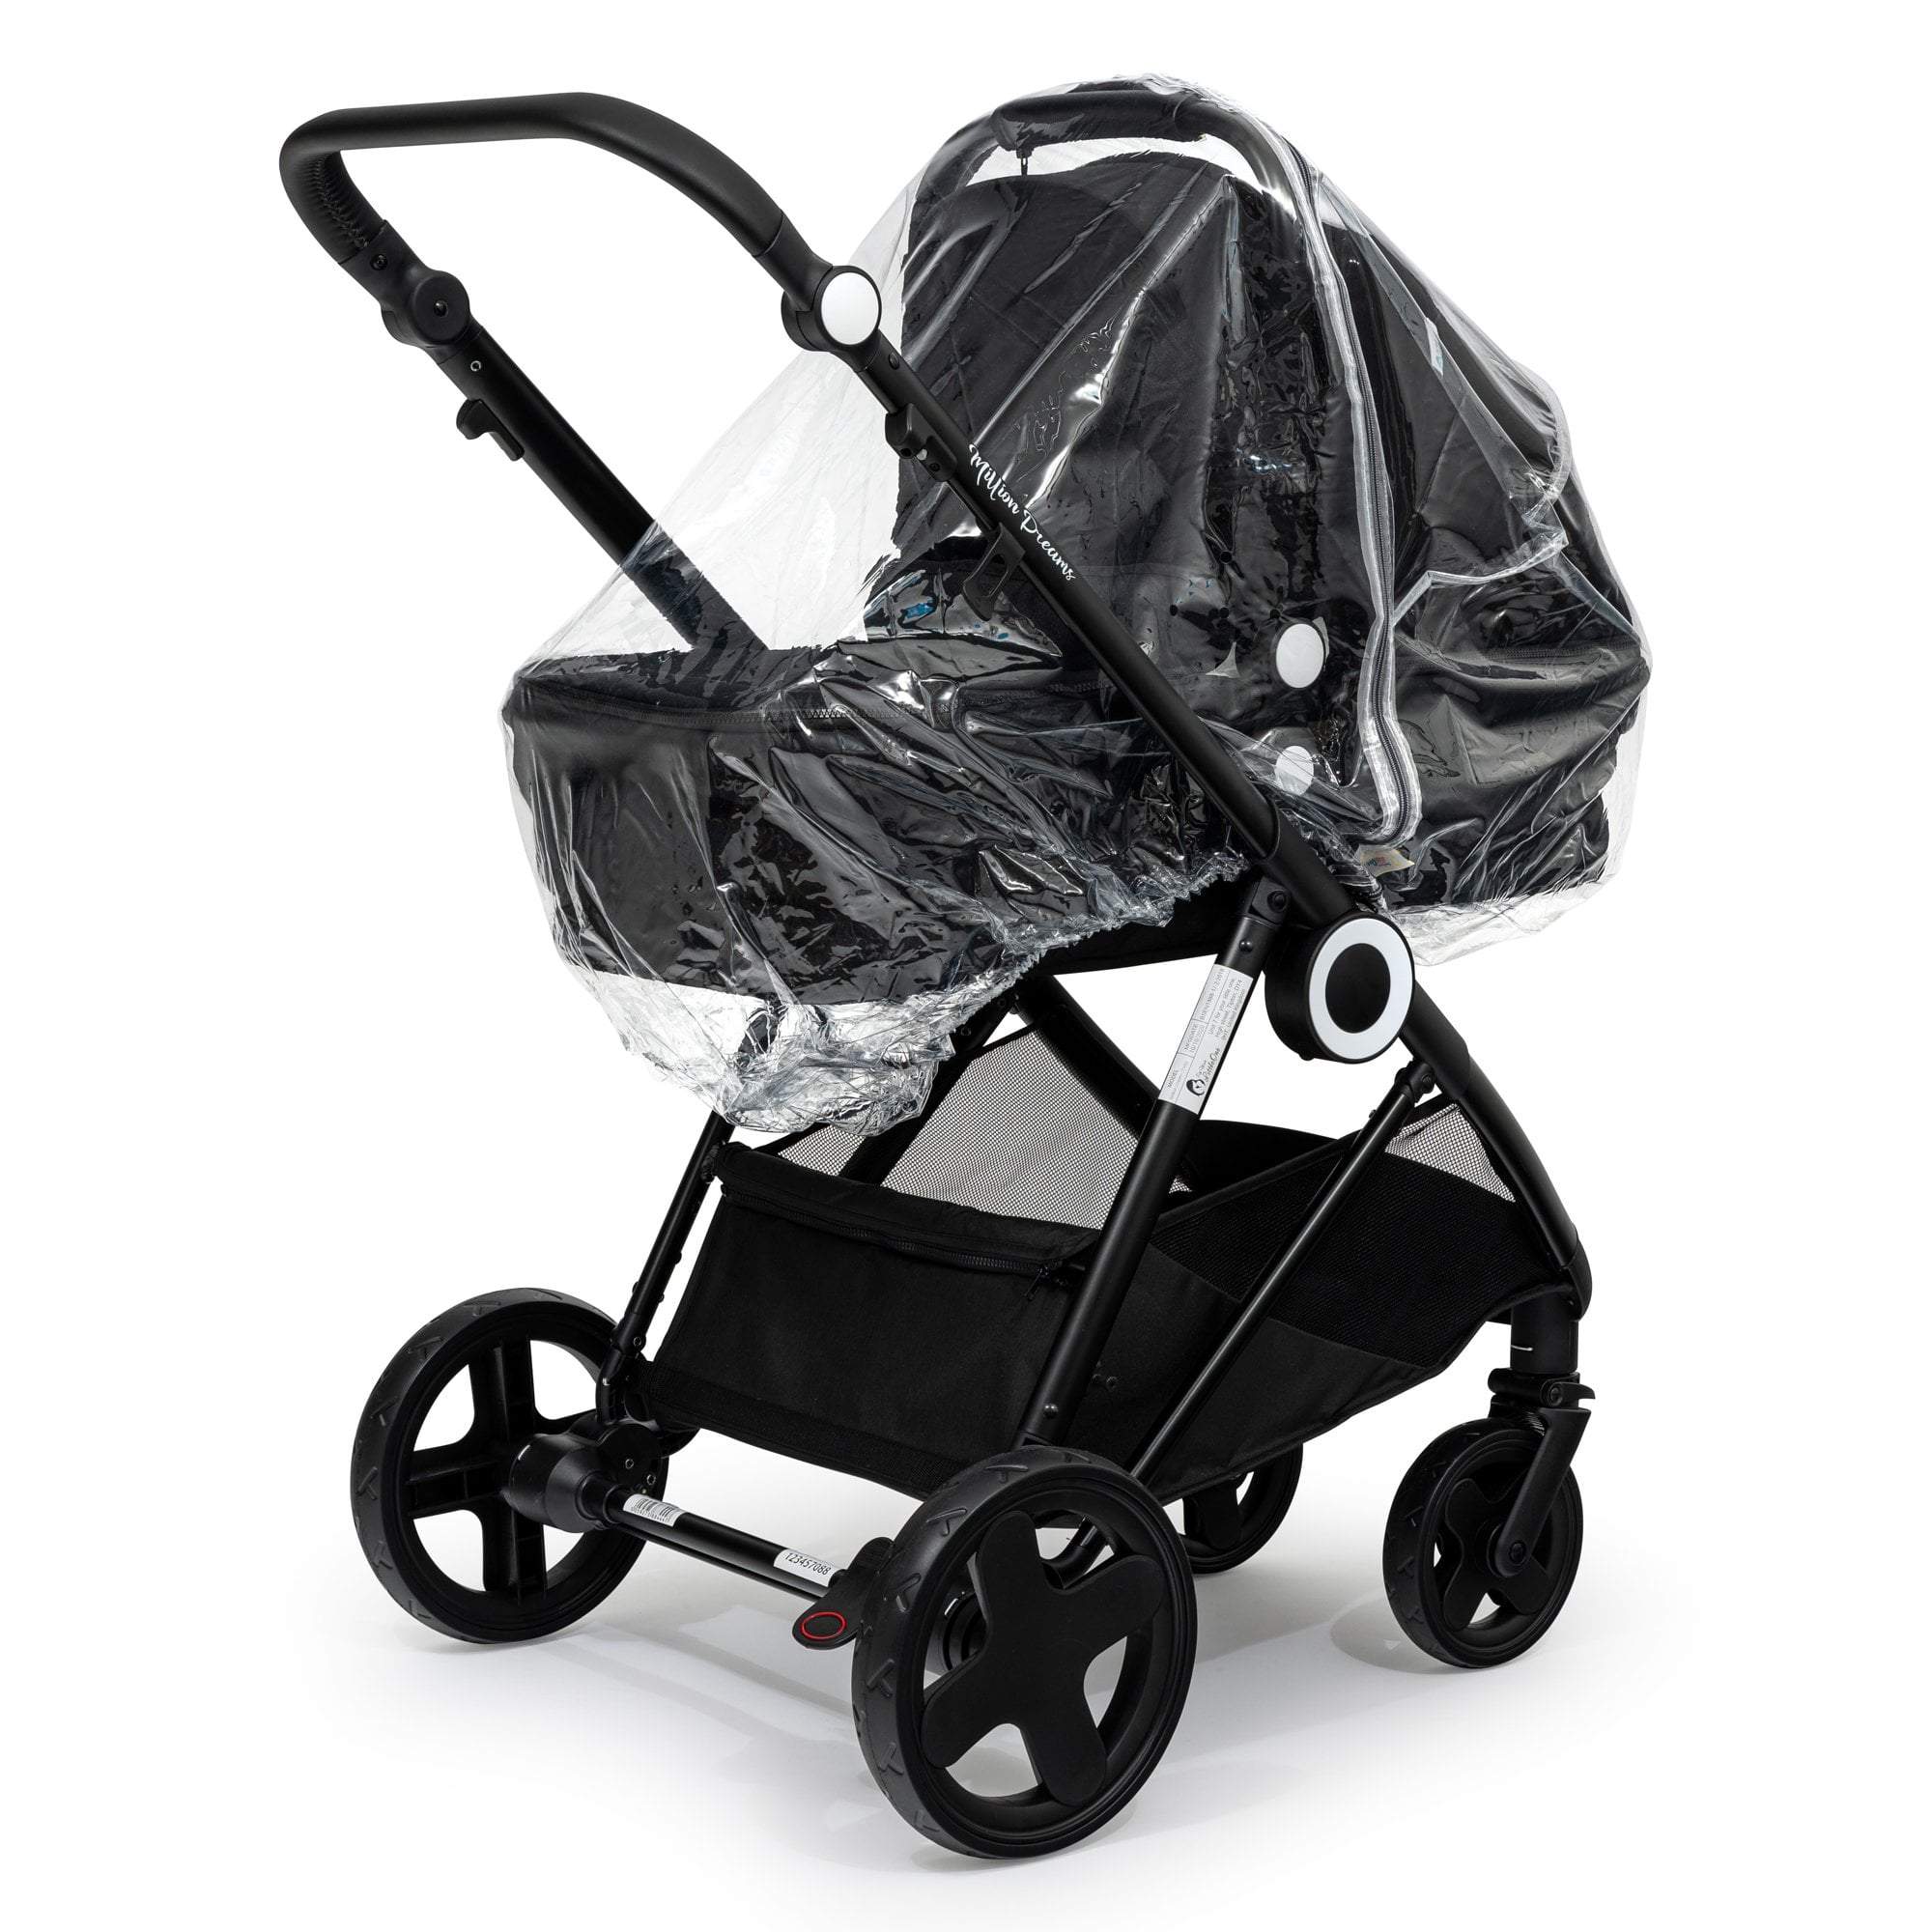 Carrycot Raincover Compatible With Greentom - Fits All Models - For Your Little One